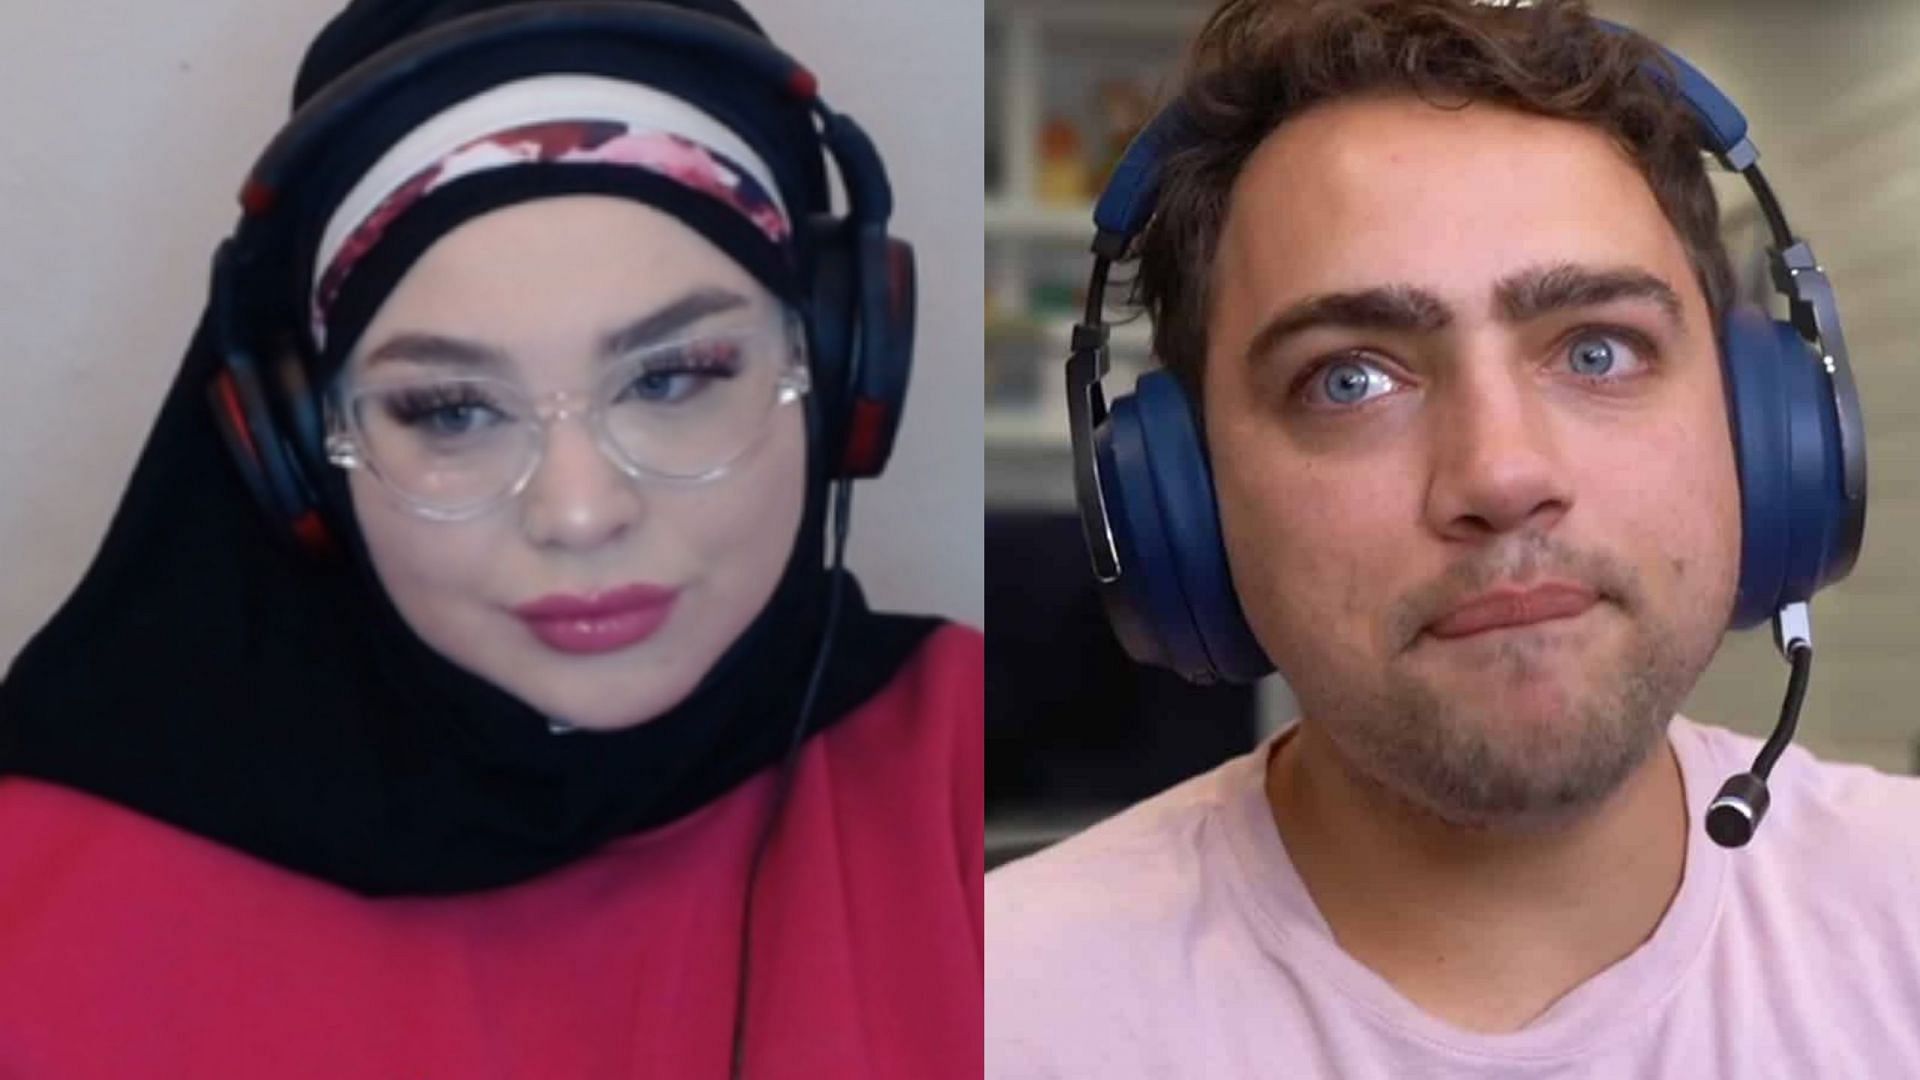 Frogan compares her facial features to Mizkifs&#039;s (Images via Twitch/Forgan and Twitch/Mizkif)